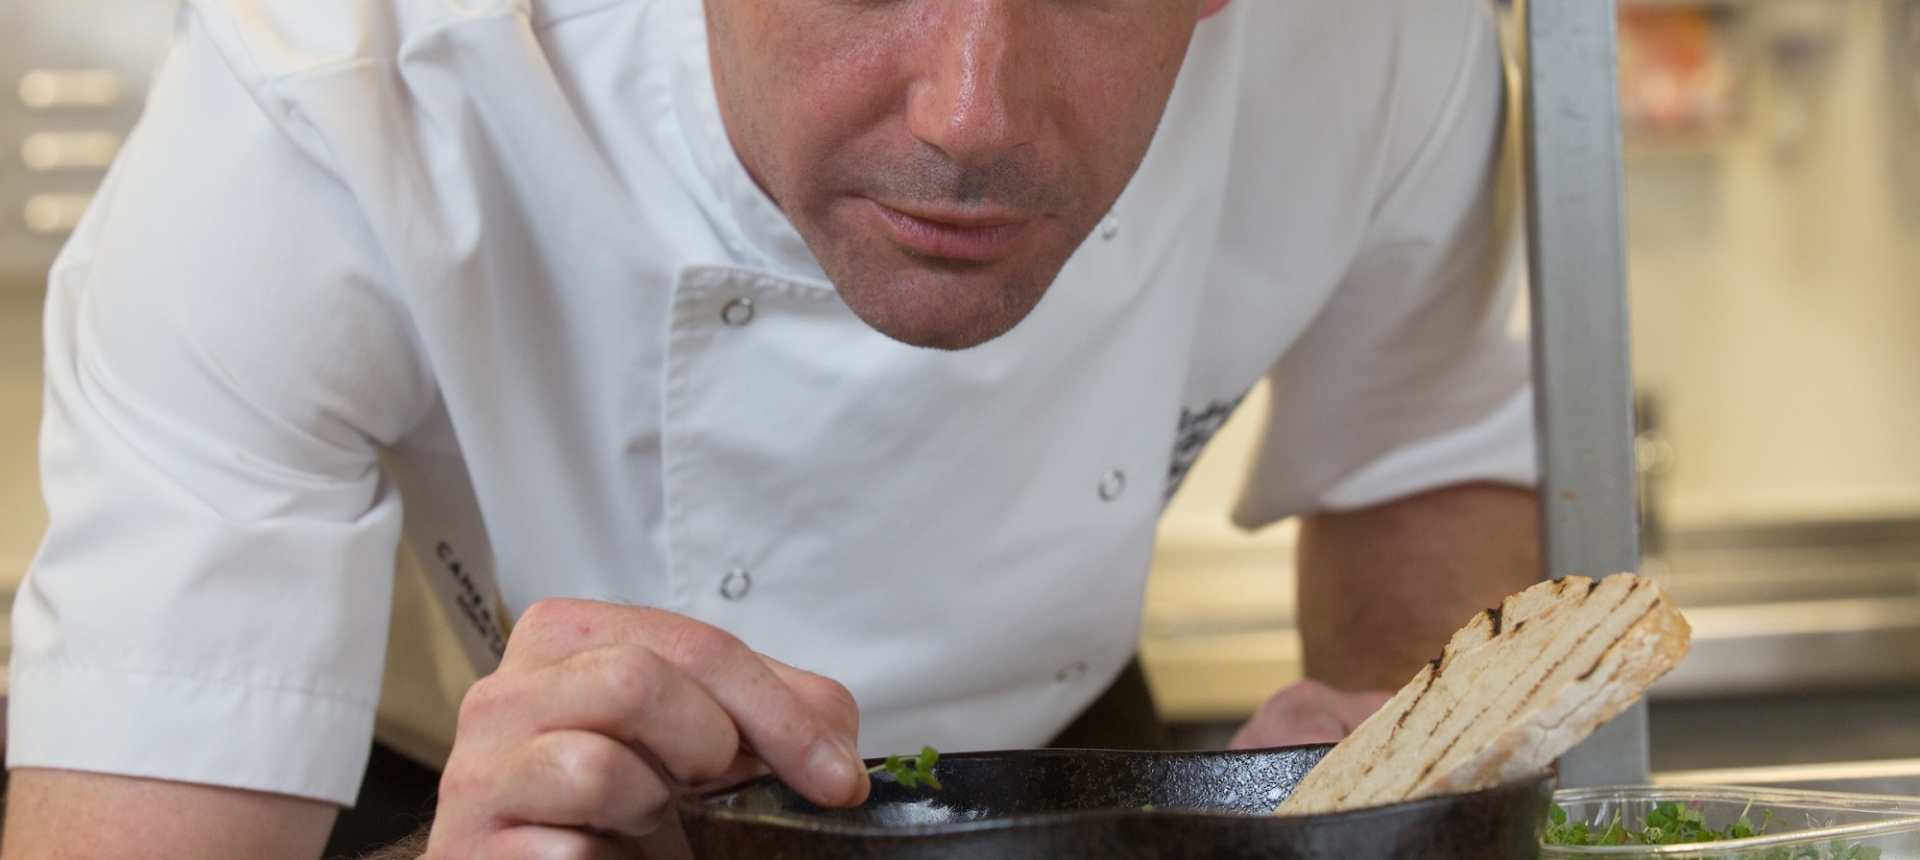 A chef delicately places the finishing touches on an entrée